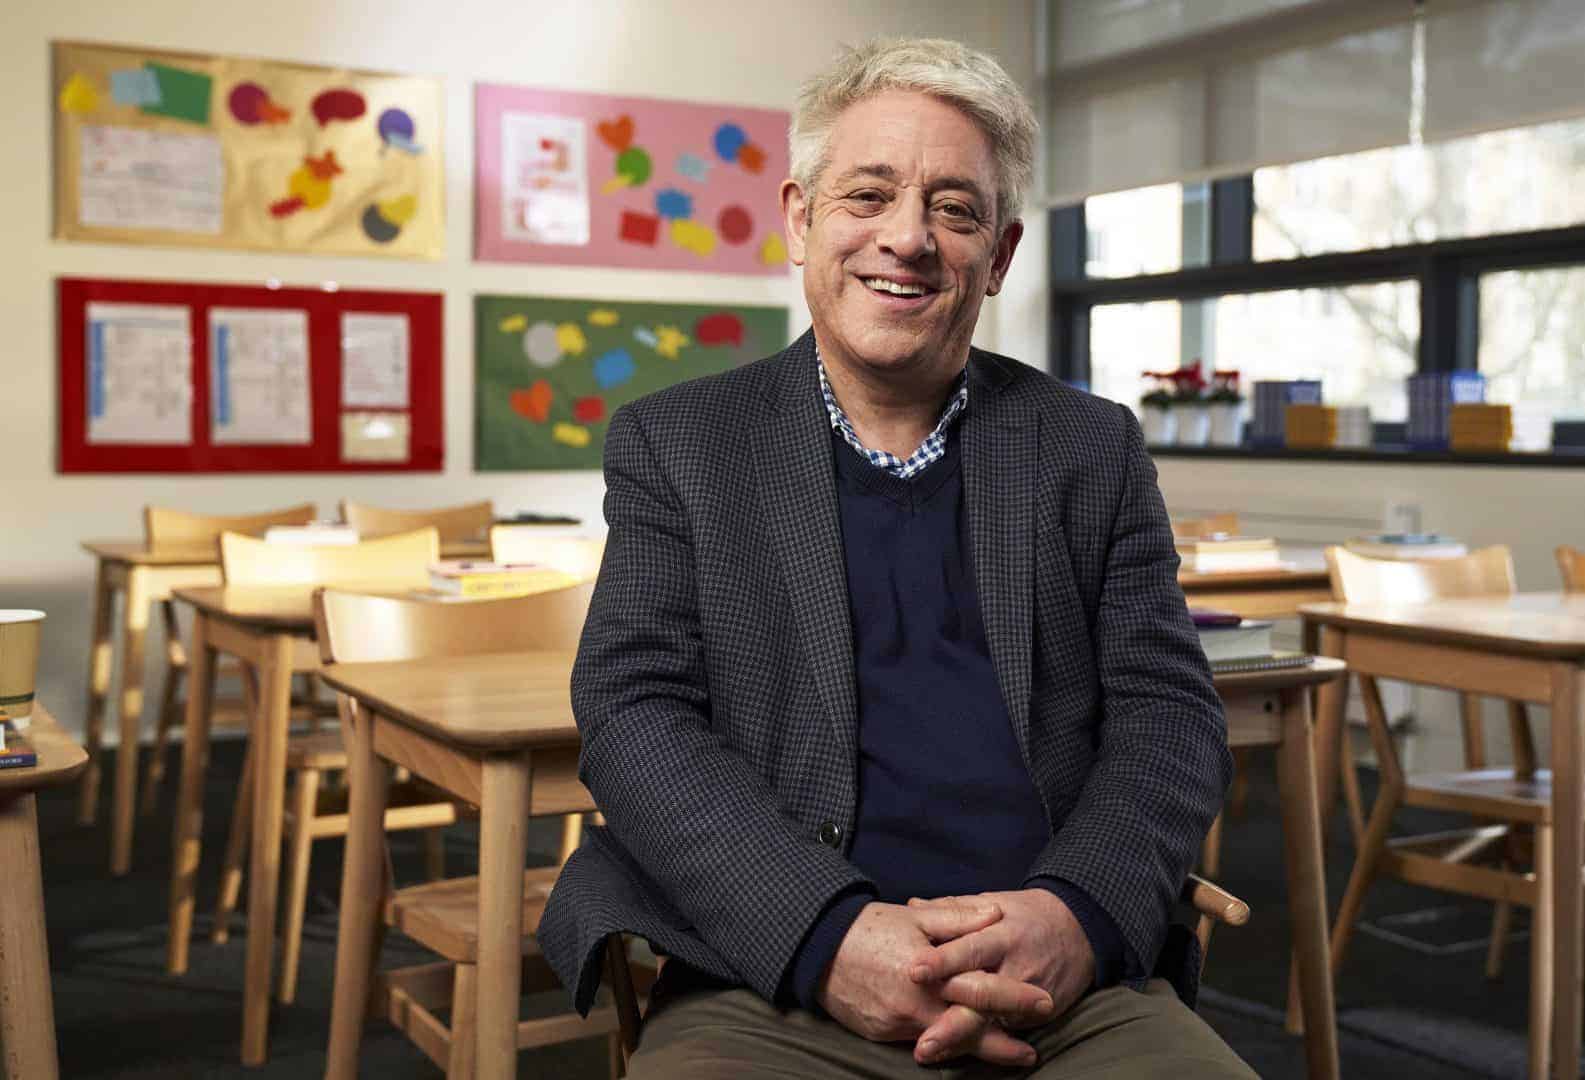 John Bercow calls for personal courtesy in Channel 4’s Alternative Christmas Message